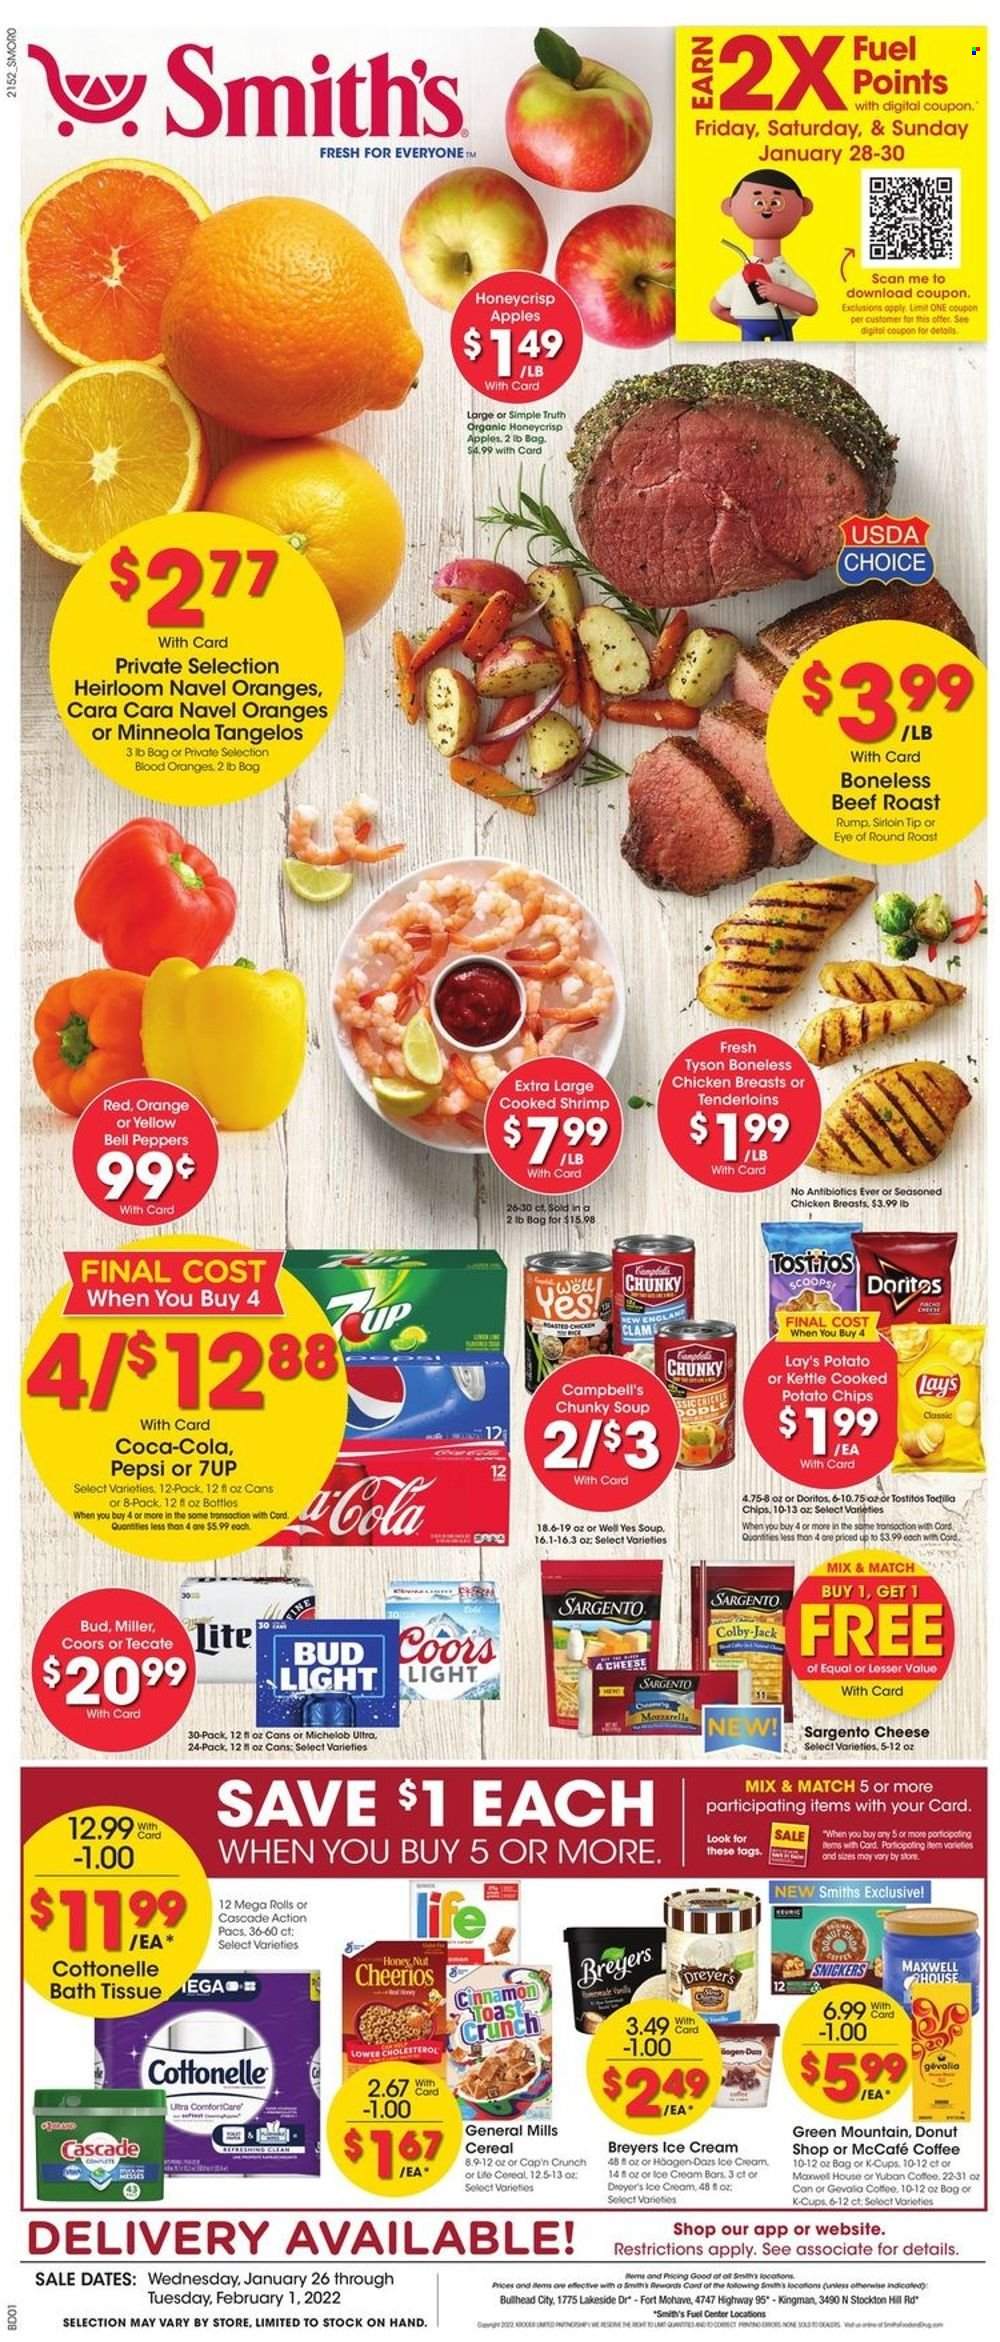 thumbnail - Smith's Flyer - 01/26/2022 - 02/01/2022 - Sales products - tangelos, donut, bell peppers, peppers, apples, oranges, clams, shrimps, Campbell's, soup, Colby cheese, mozzarella, cheese, Sargento, ice cream, Snickers, Doritos, potato chips, chips, Lay’s, Tostitos, cereals, Cheerios, Cap'n Crunch, cinnamon, Coca-Cola, Pepsi, 7UP, coffee, coffee capsules, McCafe, K-Cups, Gevalia, Green Mountain, beer, Bud Light, Miller, chicken breasts, beef meat, eye of round, roast beef, bath tissue, Cottonelle, Cascade, Coors, Michelob, navel oranges. Page 1.